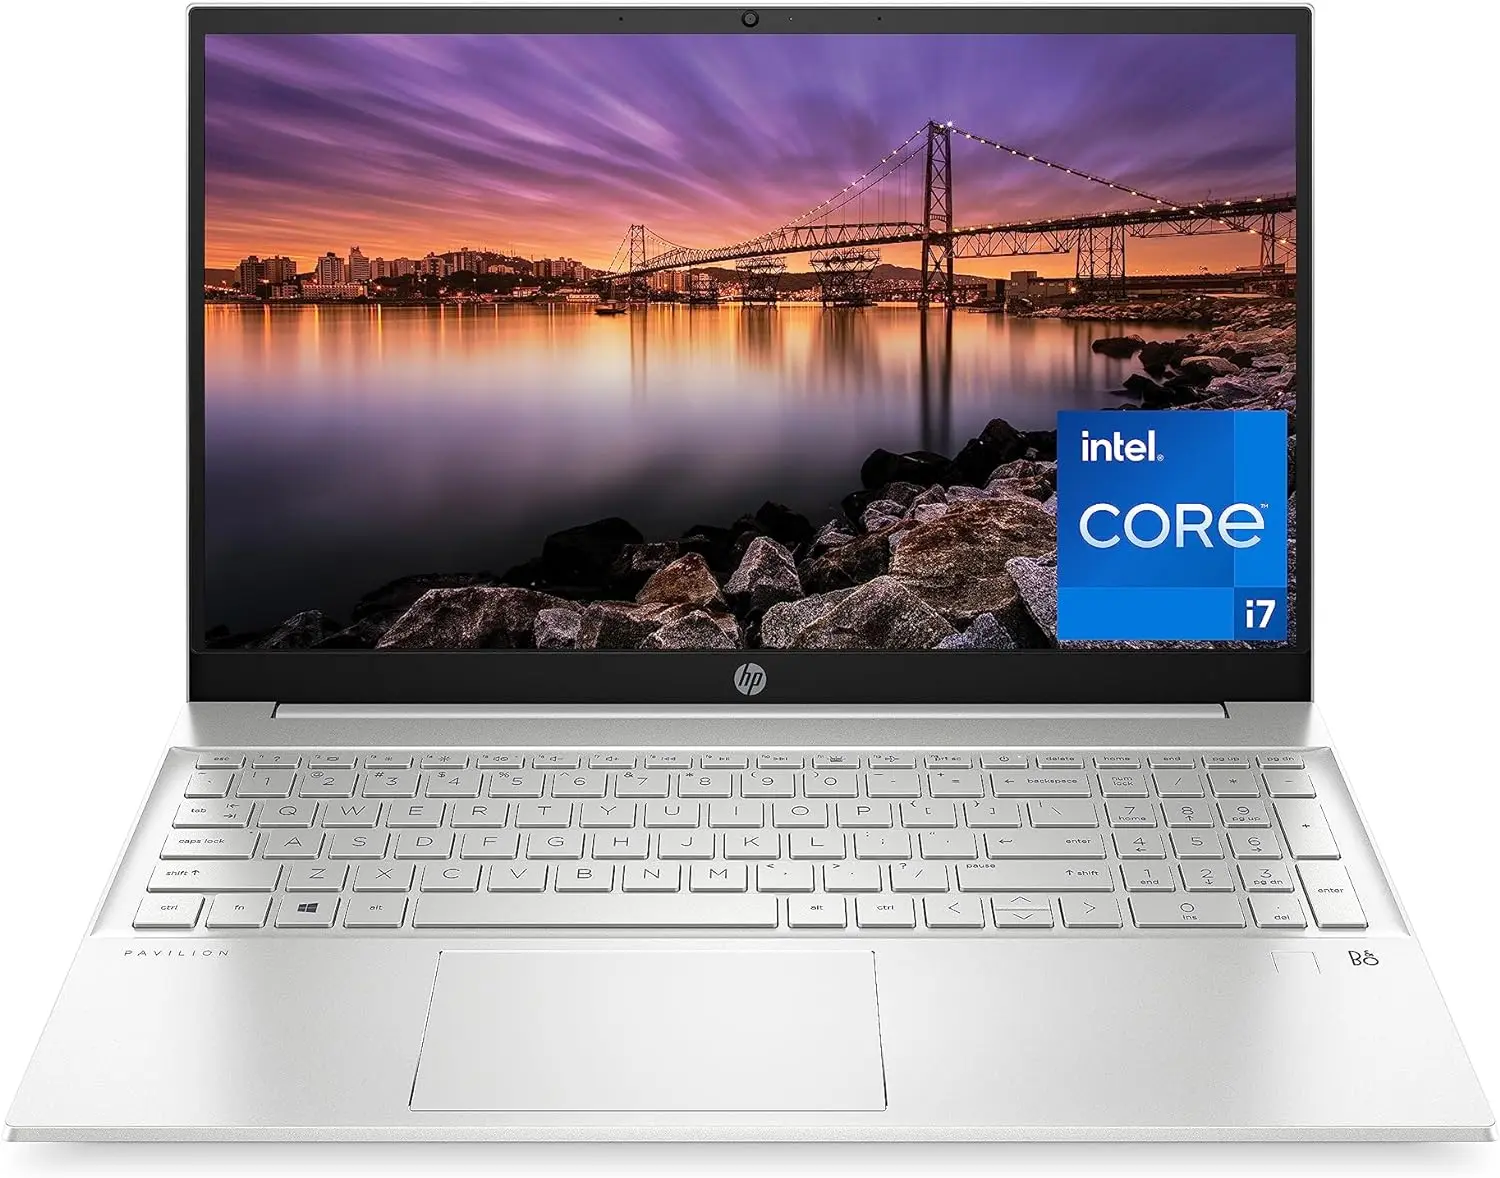 hp hewlett packard price philippines - How much is HP Pavilion i7 12th generation in the Philippines